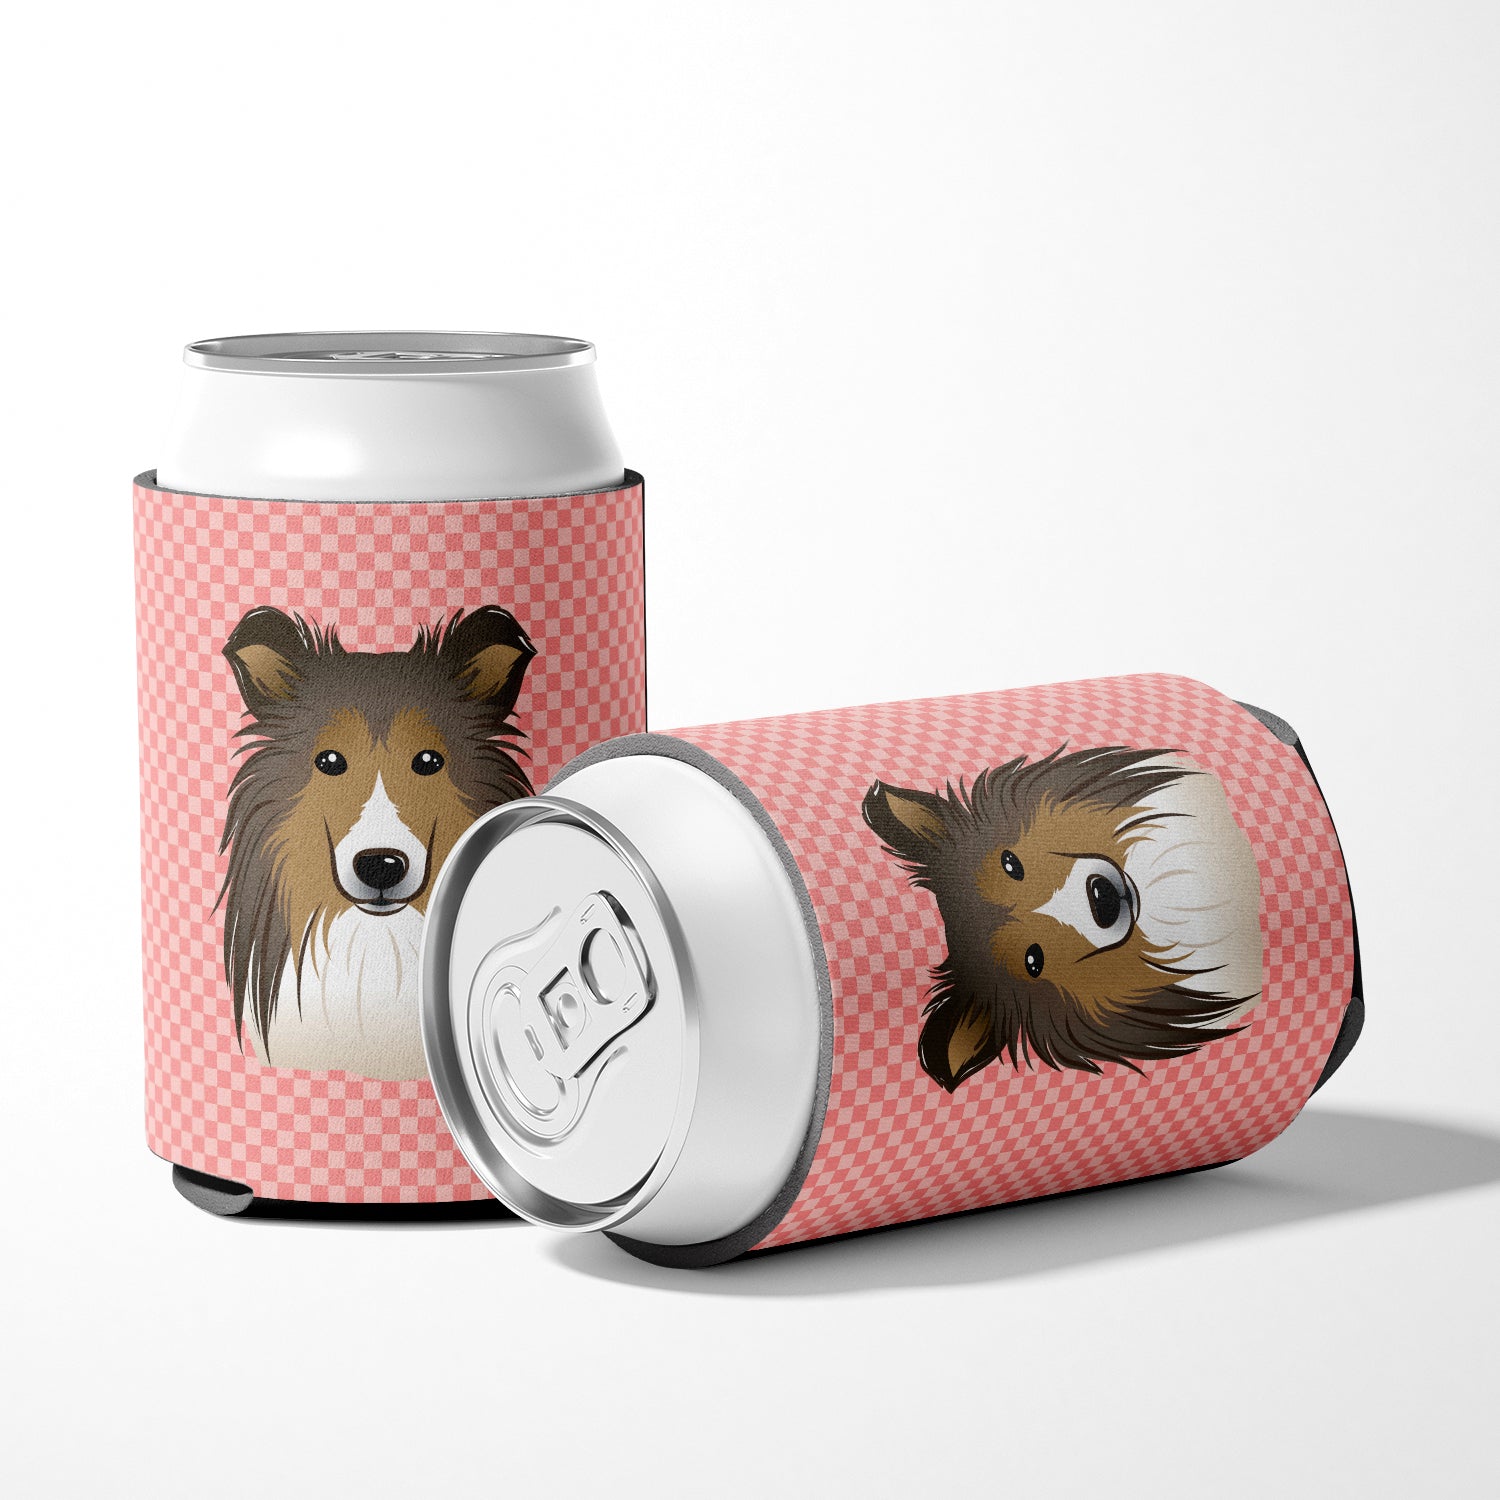 Checkerboard Pink Sheltie Can or Bottle Hugger BB1242CC.